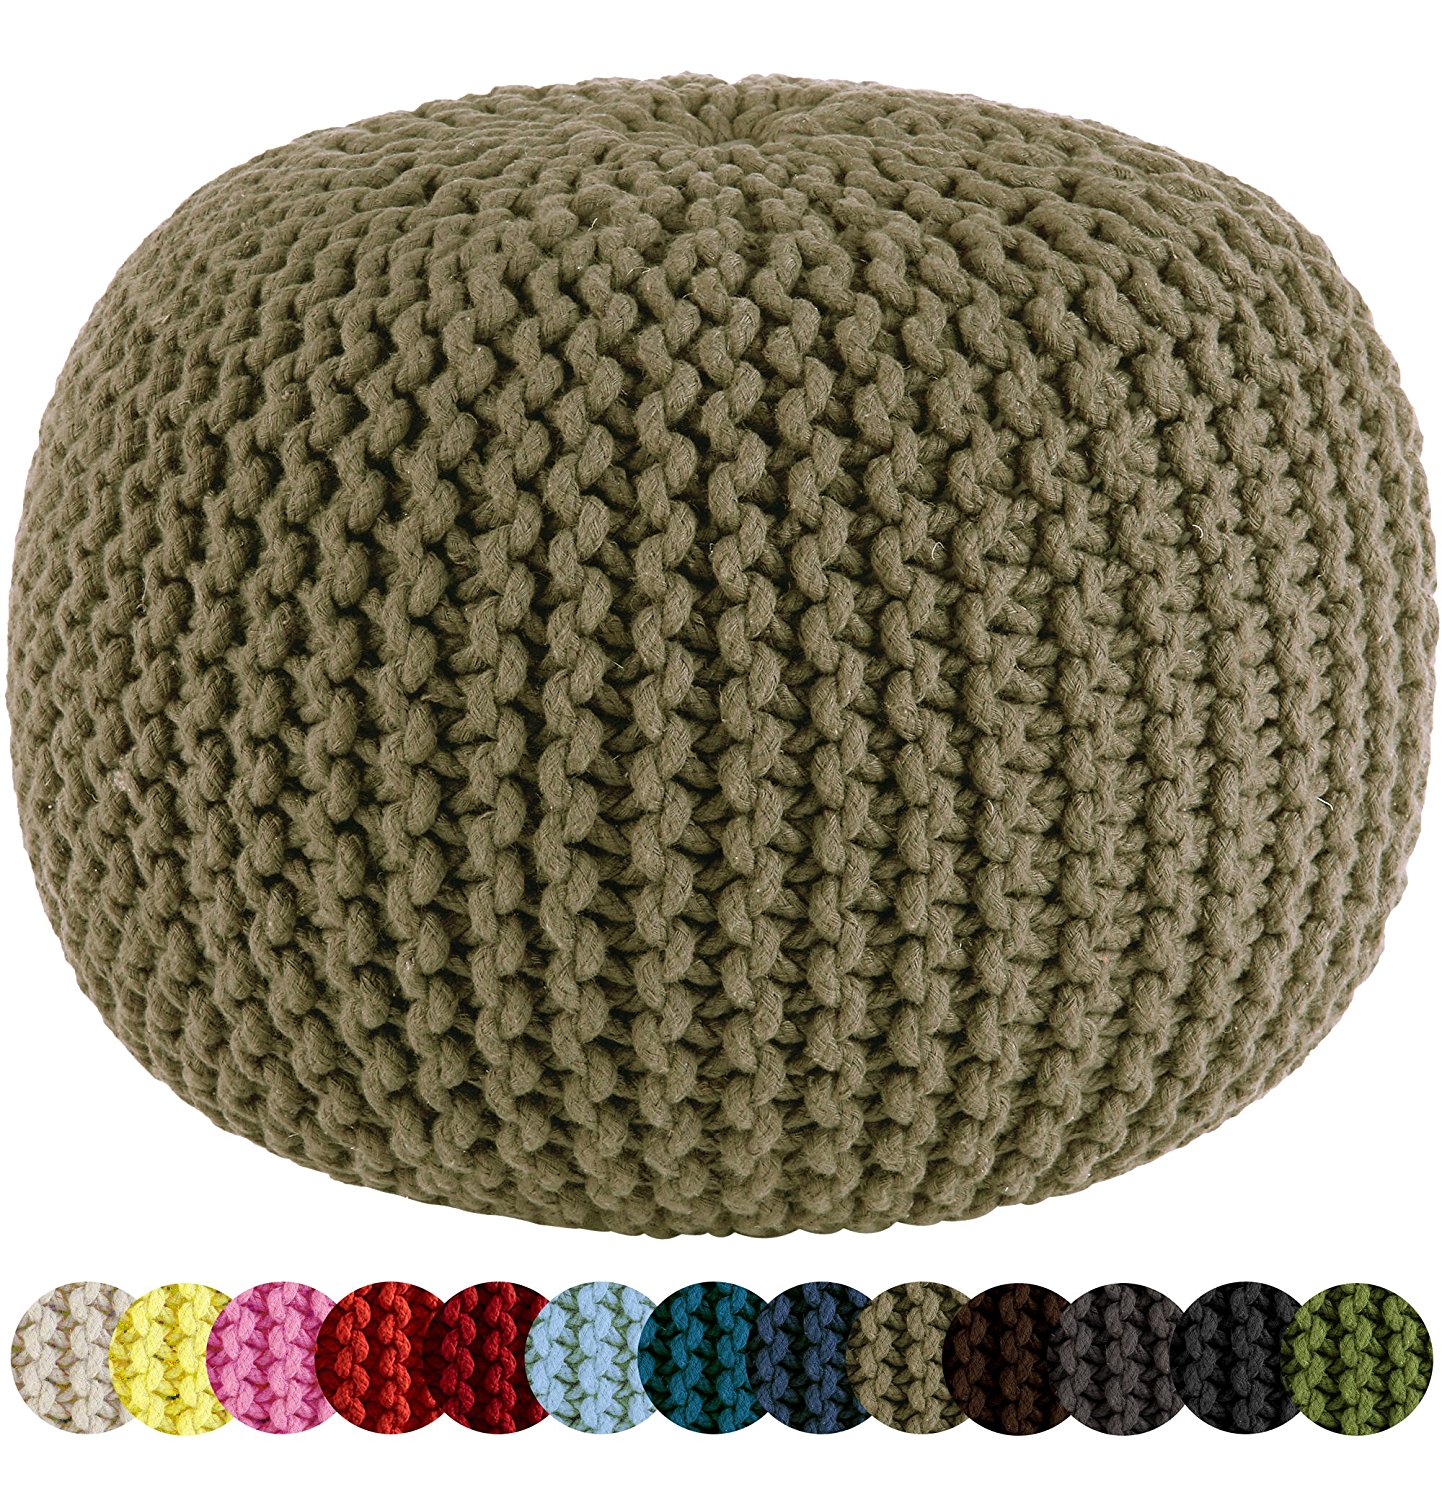 knitted pouf amazon.com: cotton craft - hand knitted cable style dori pouf - beige - kkrpfyq